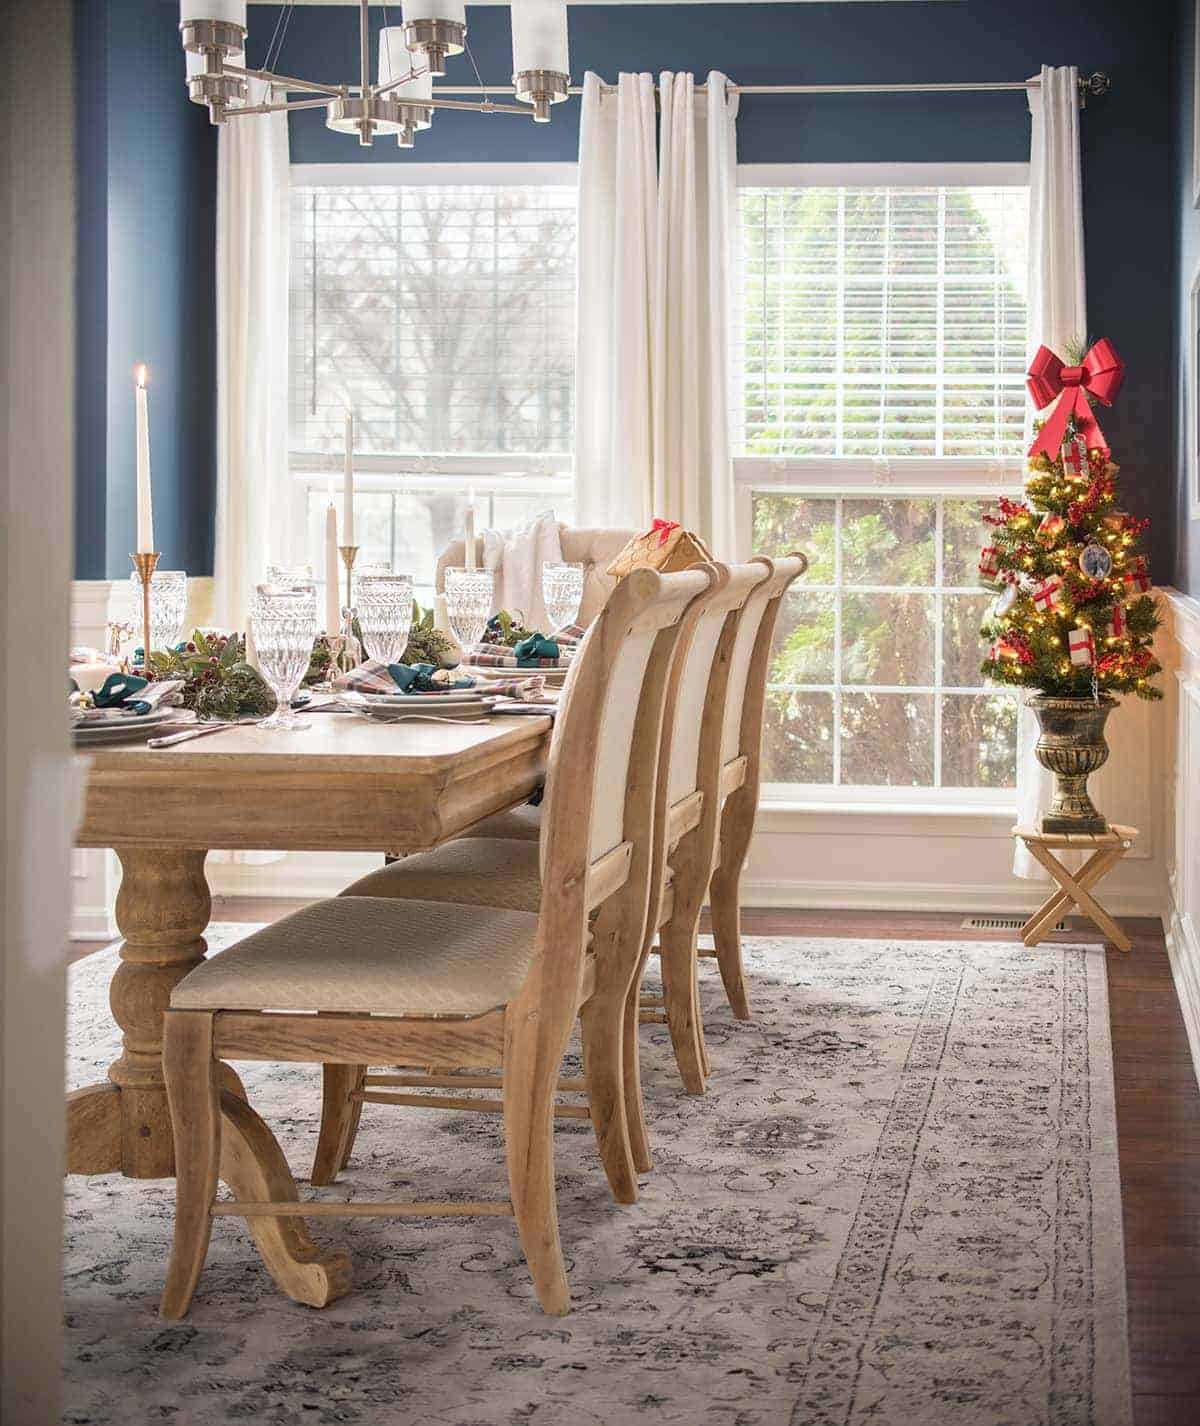 Tartan themed Christmas dining room decor. Natural light dining room furniture with dark blue painted walls.